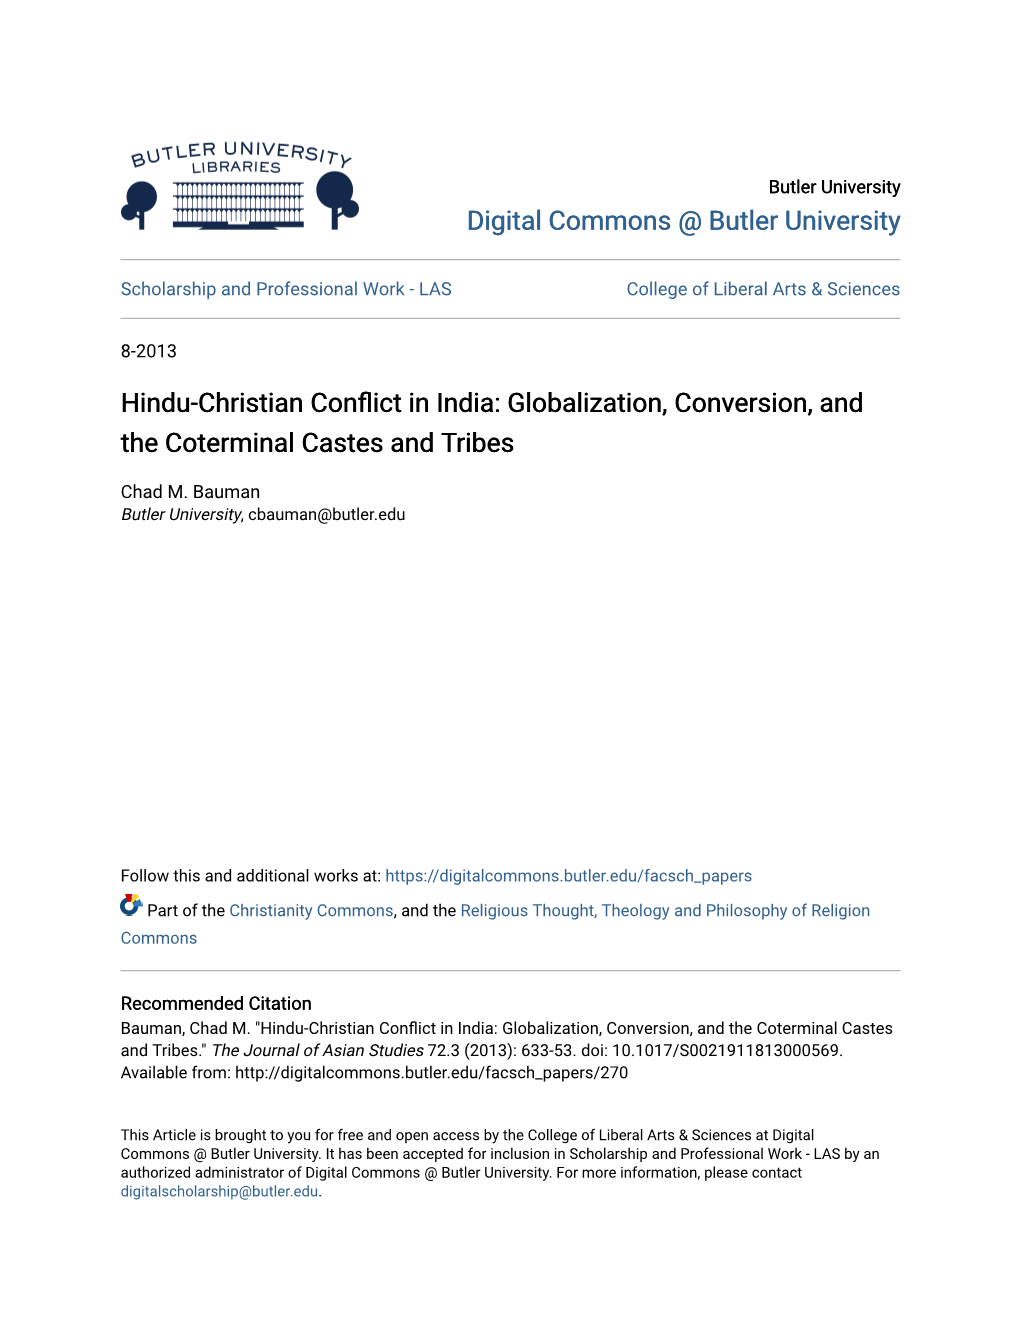 Hindu-Christian Conflict in India: Globalization, Conversion, and the Coterminal Castes and Tribes